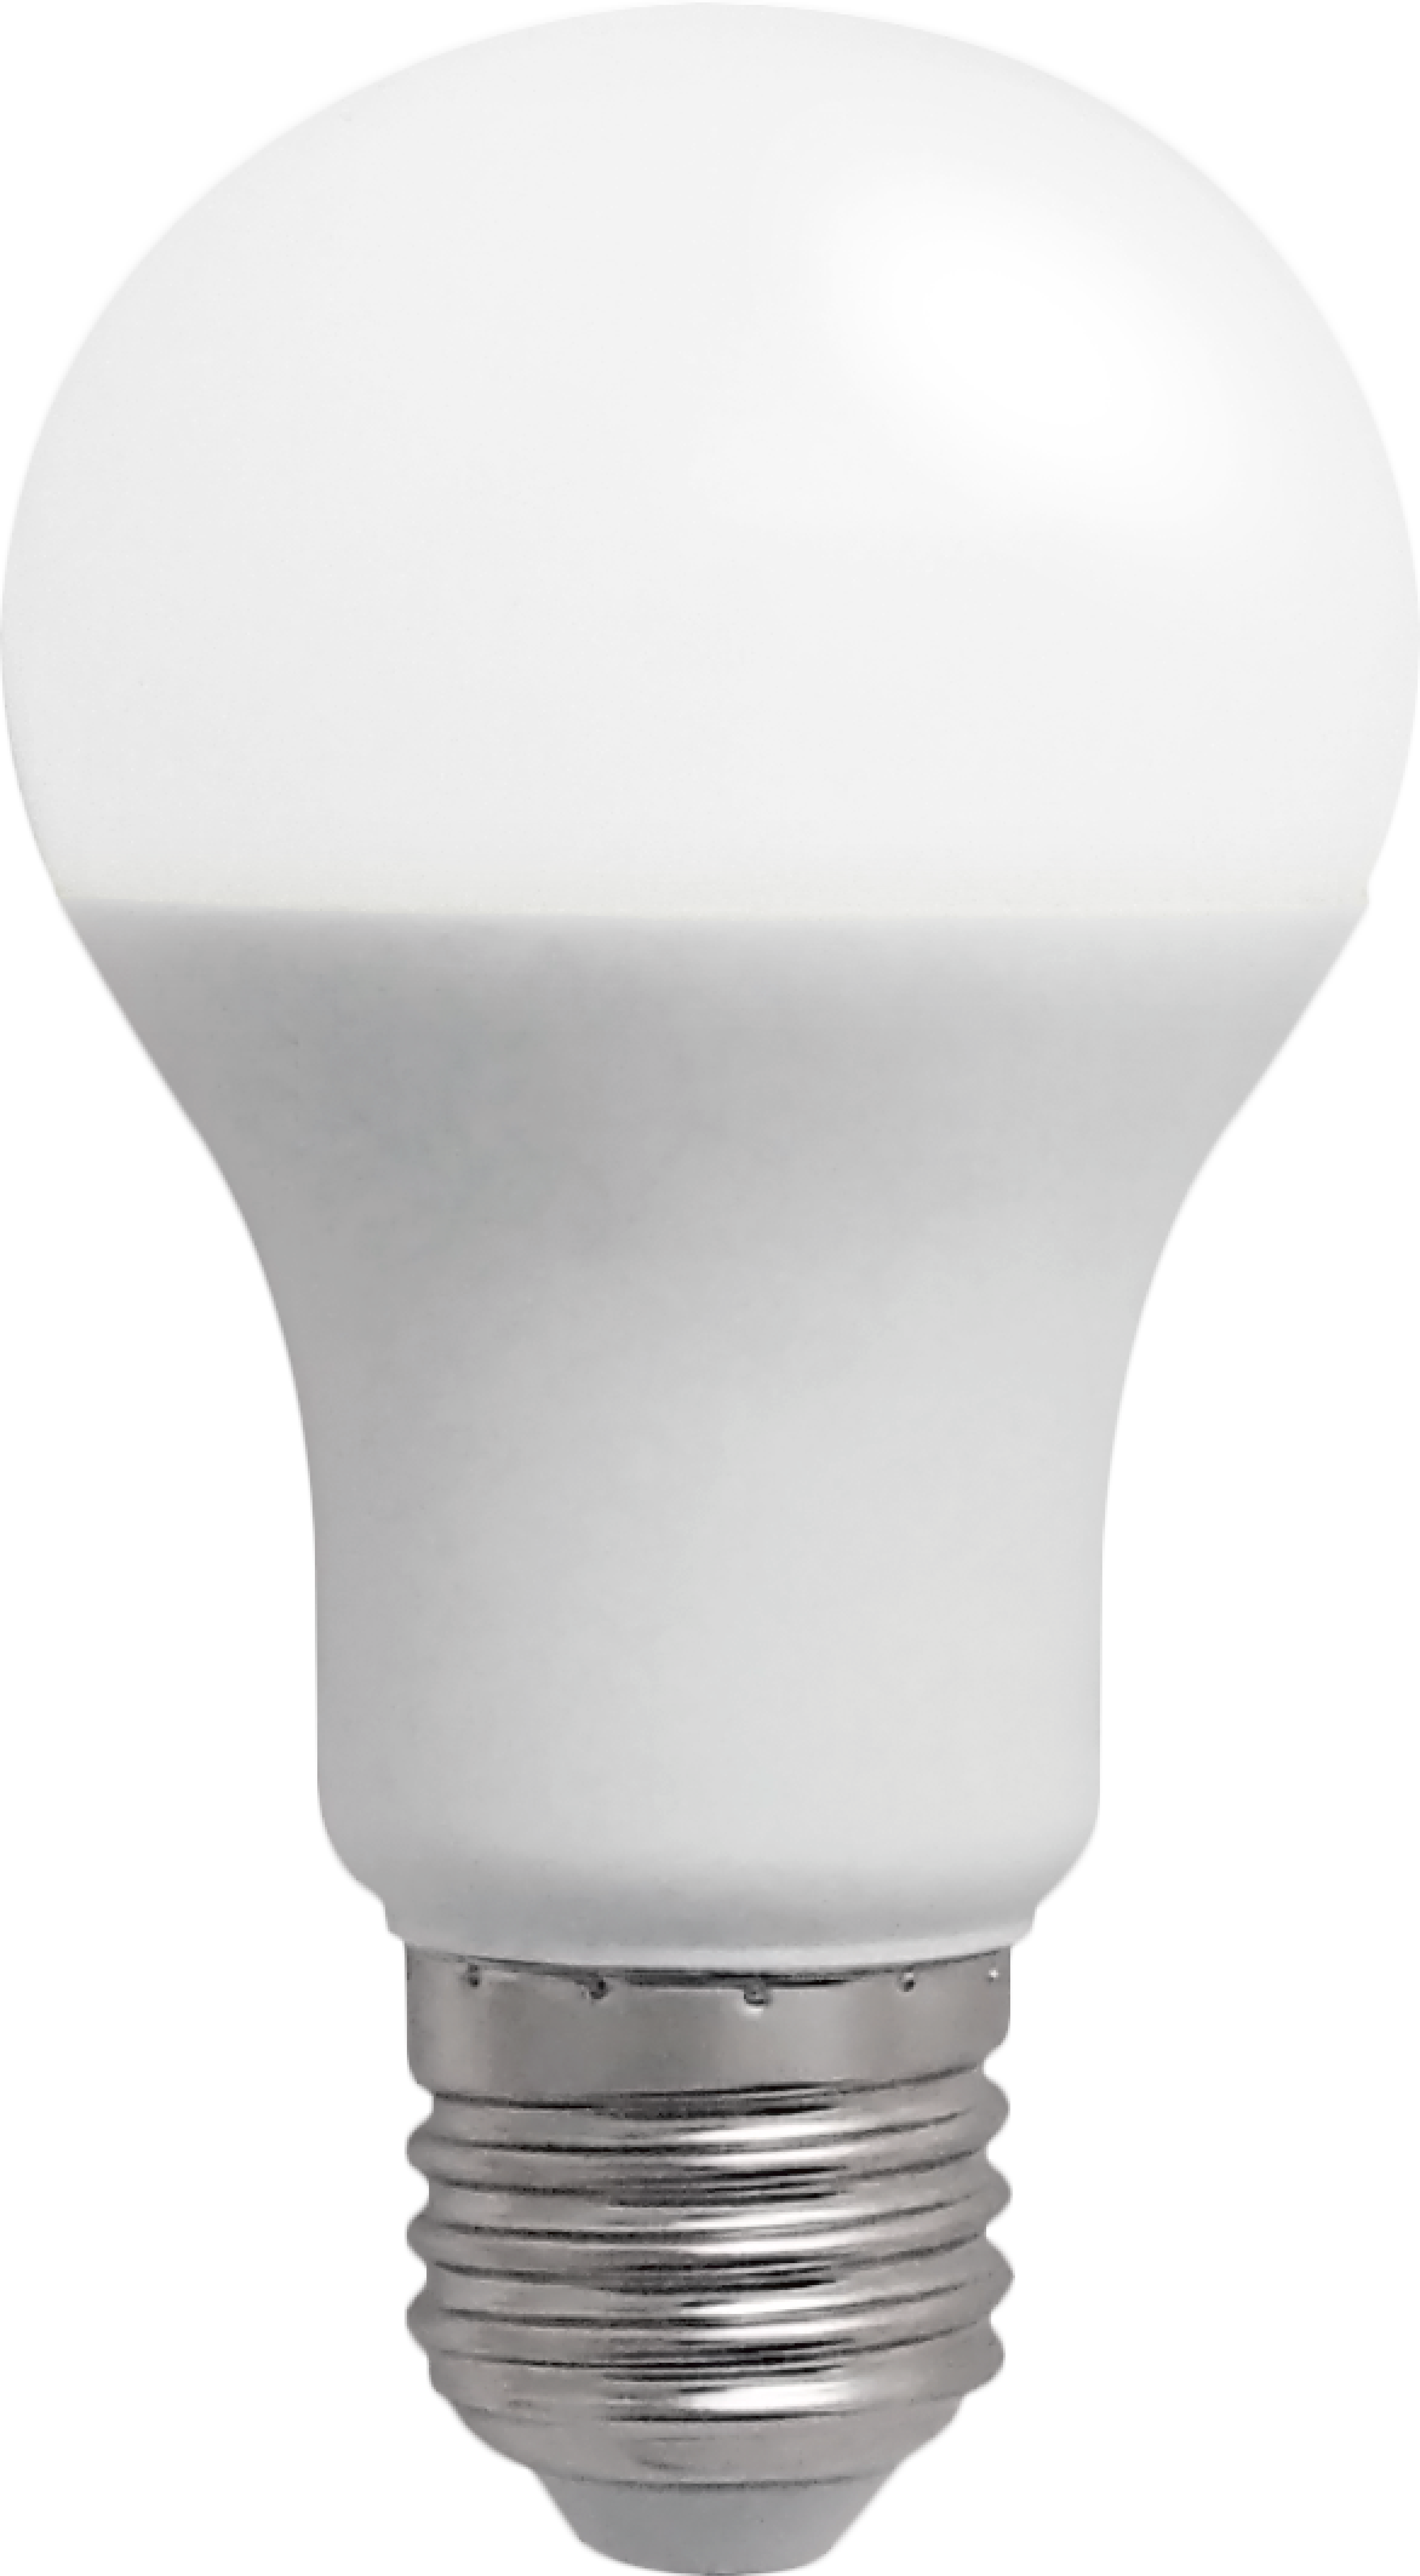 Dimmable A60 LED Bulb 10W